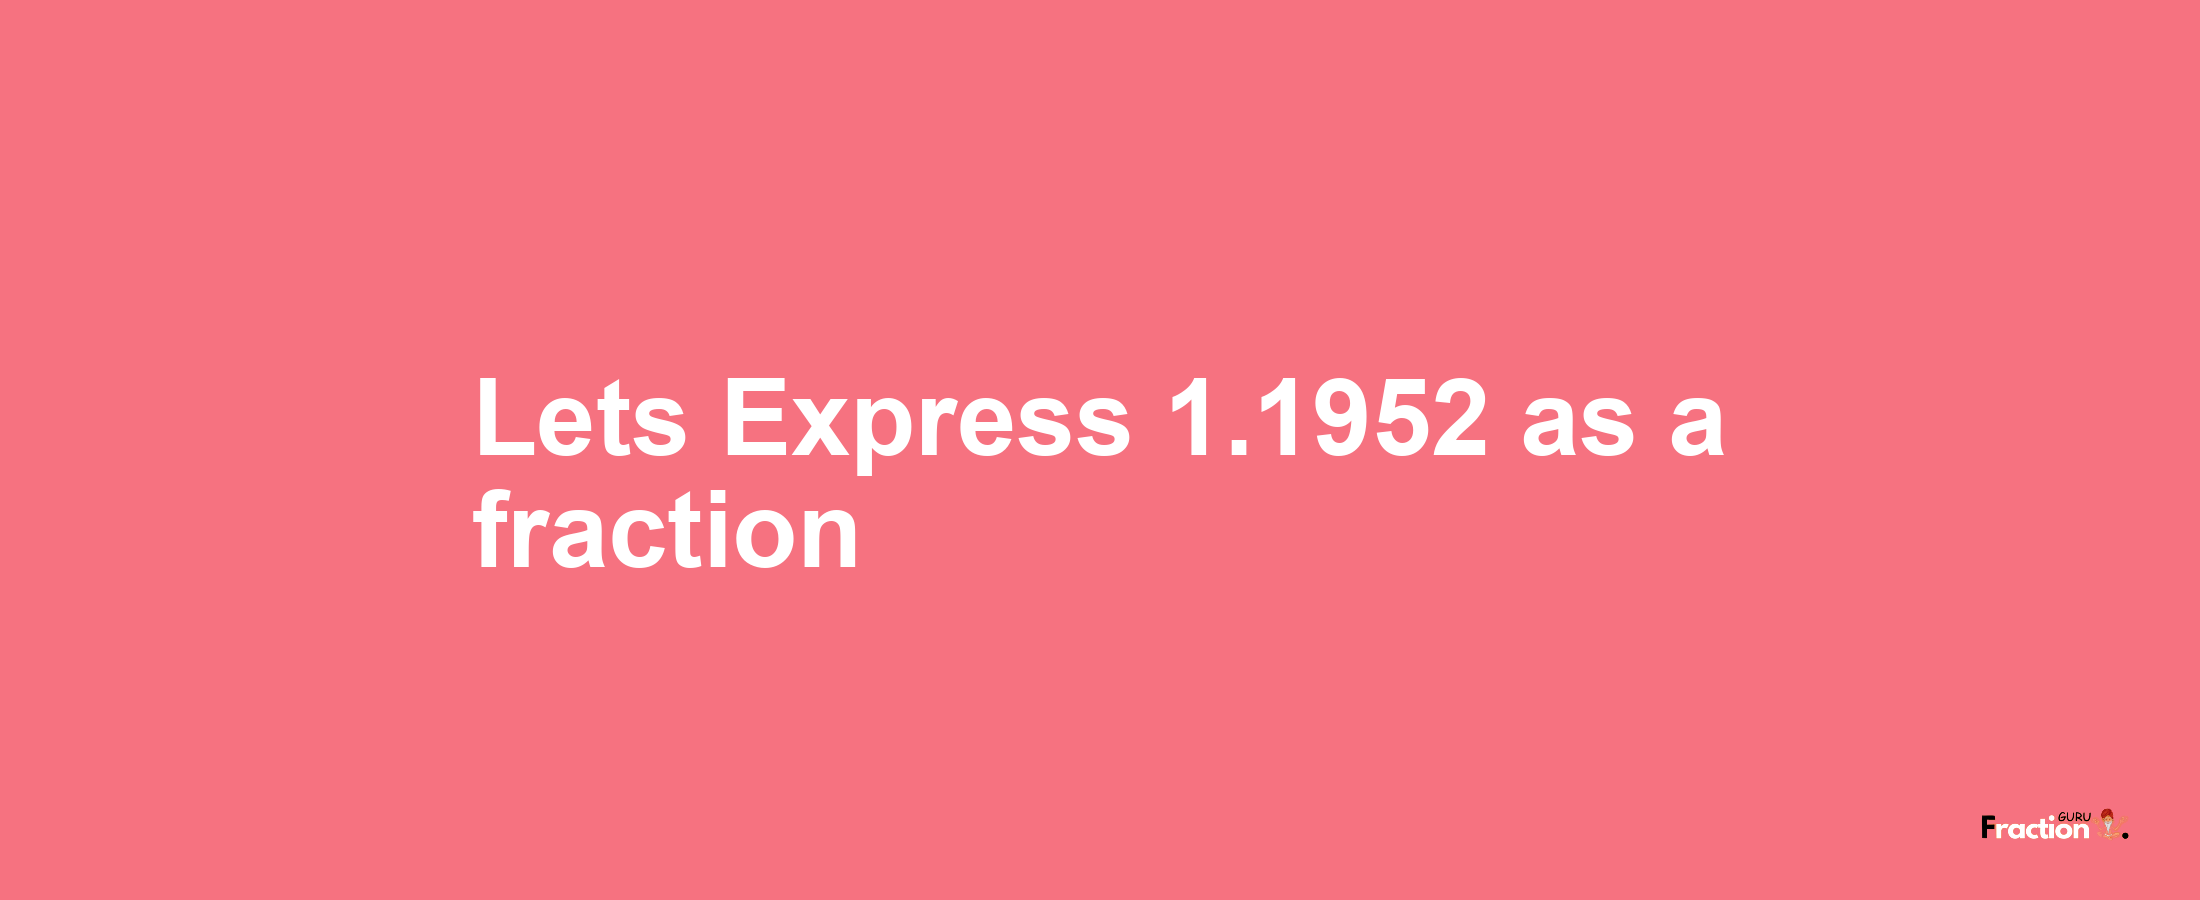 Lets Express 1.1952 as afraction